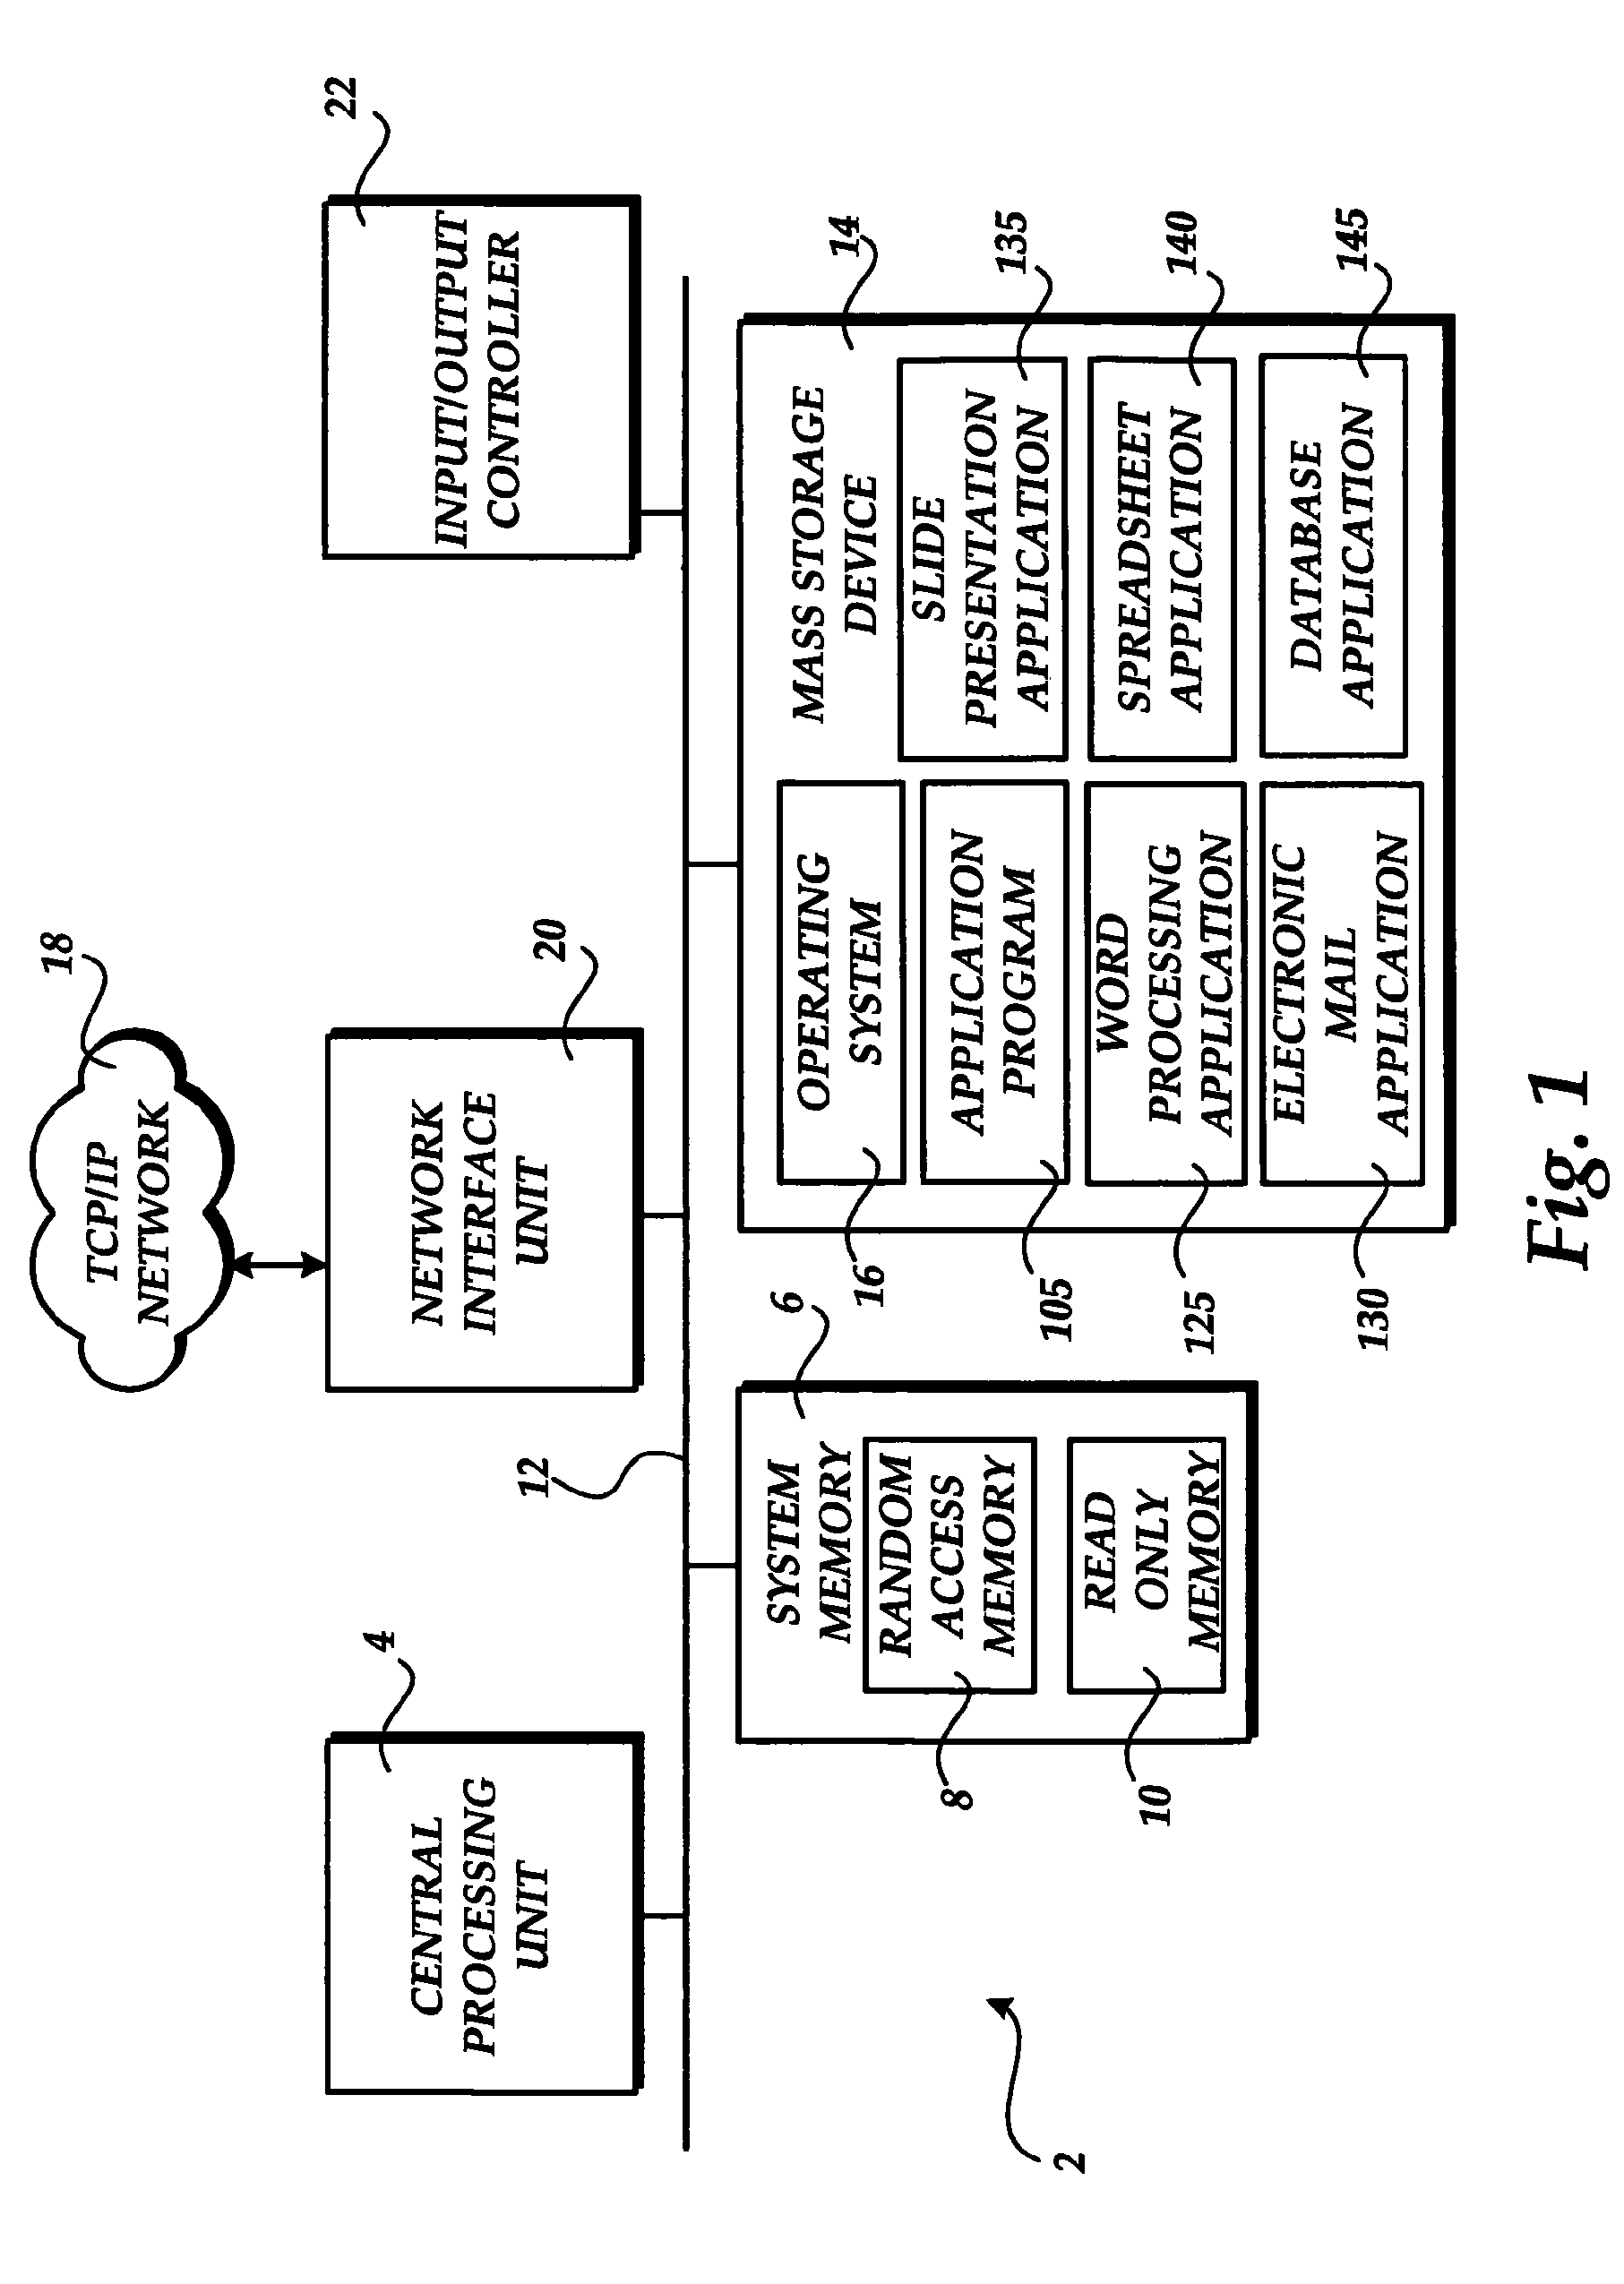 User interface for displaying selectable software functionality controls that are contextually relevant to a selected object